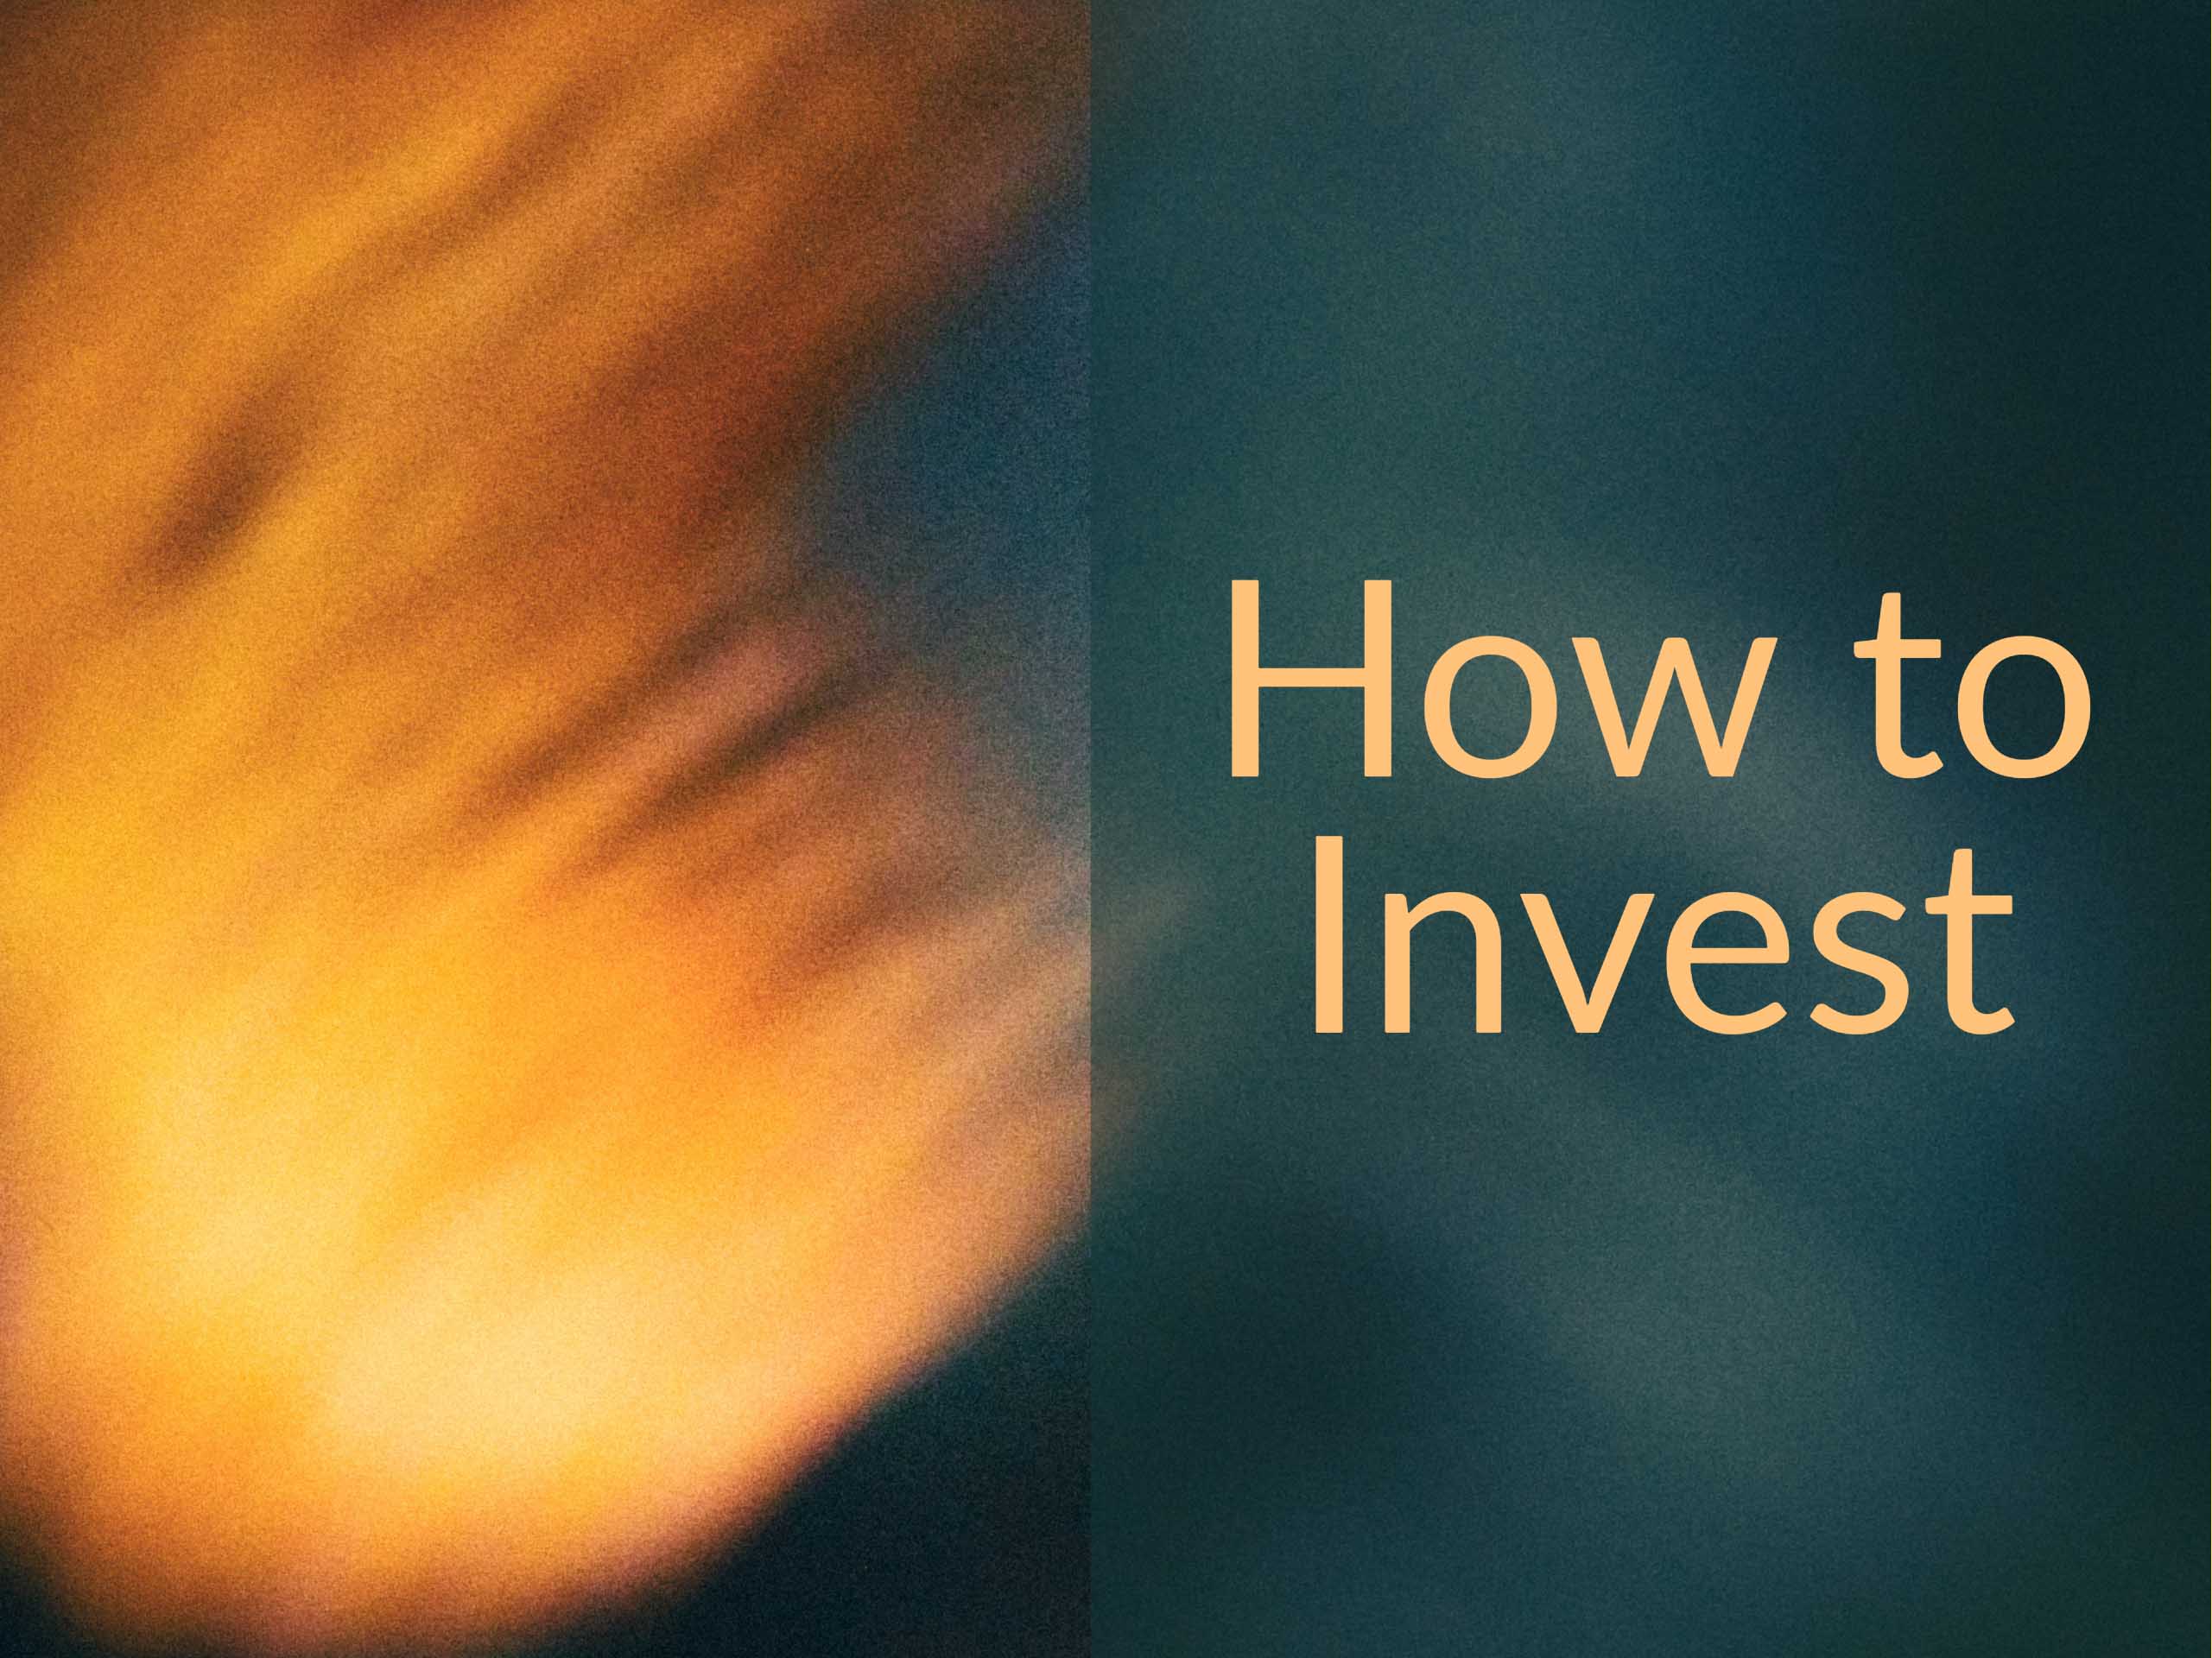 Abstract colors with the caption "How to Invest"